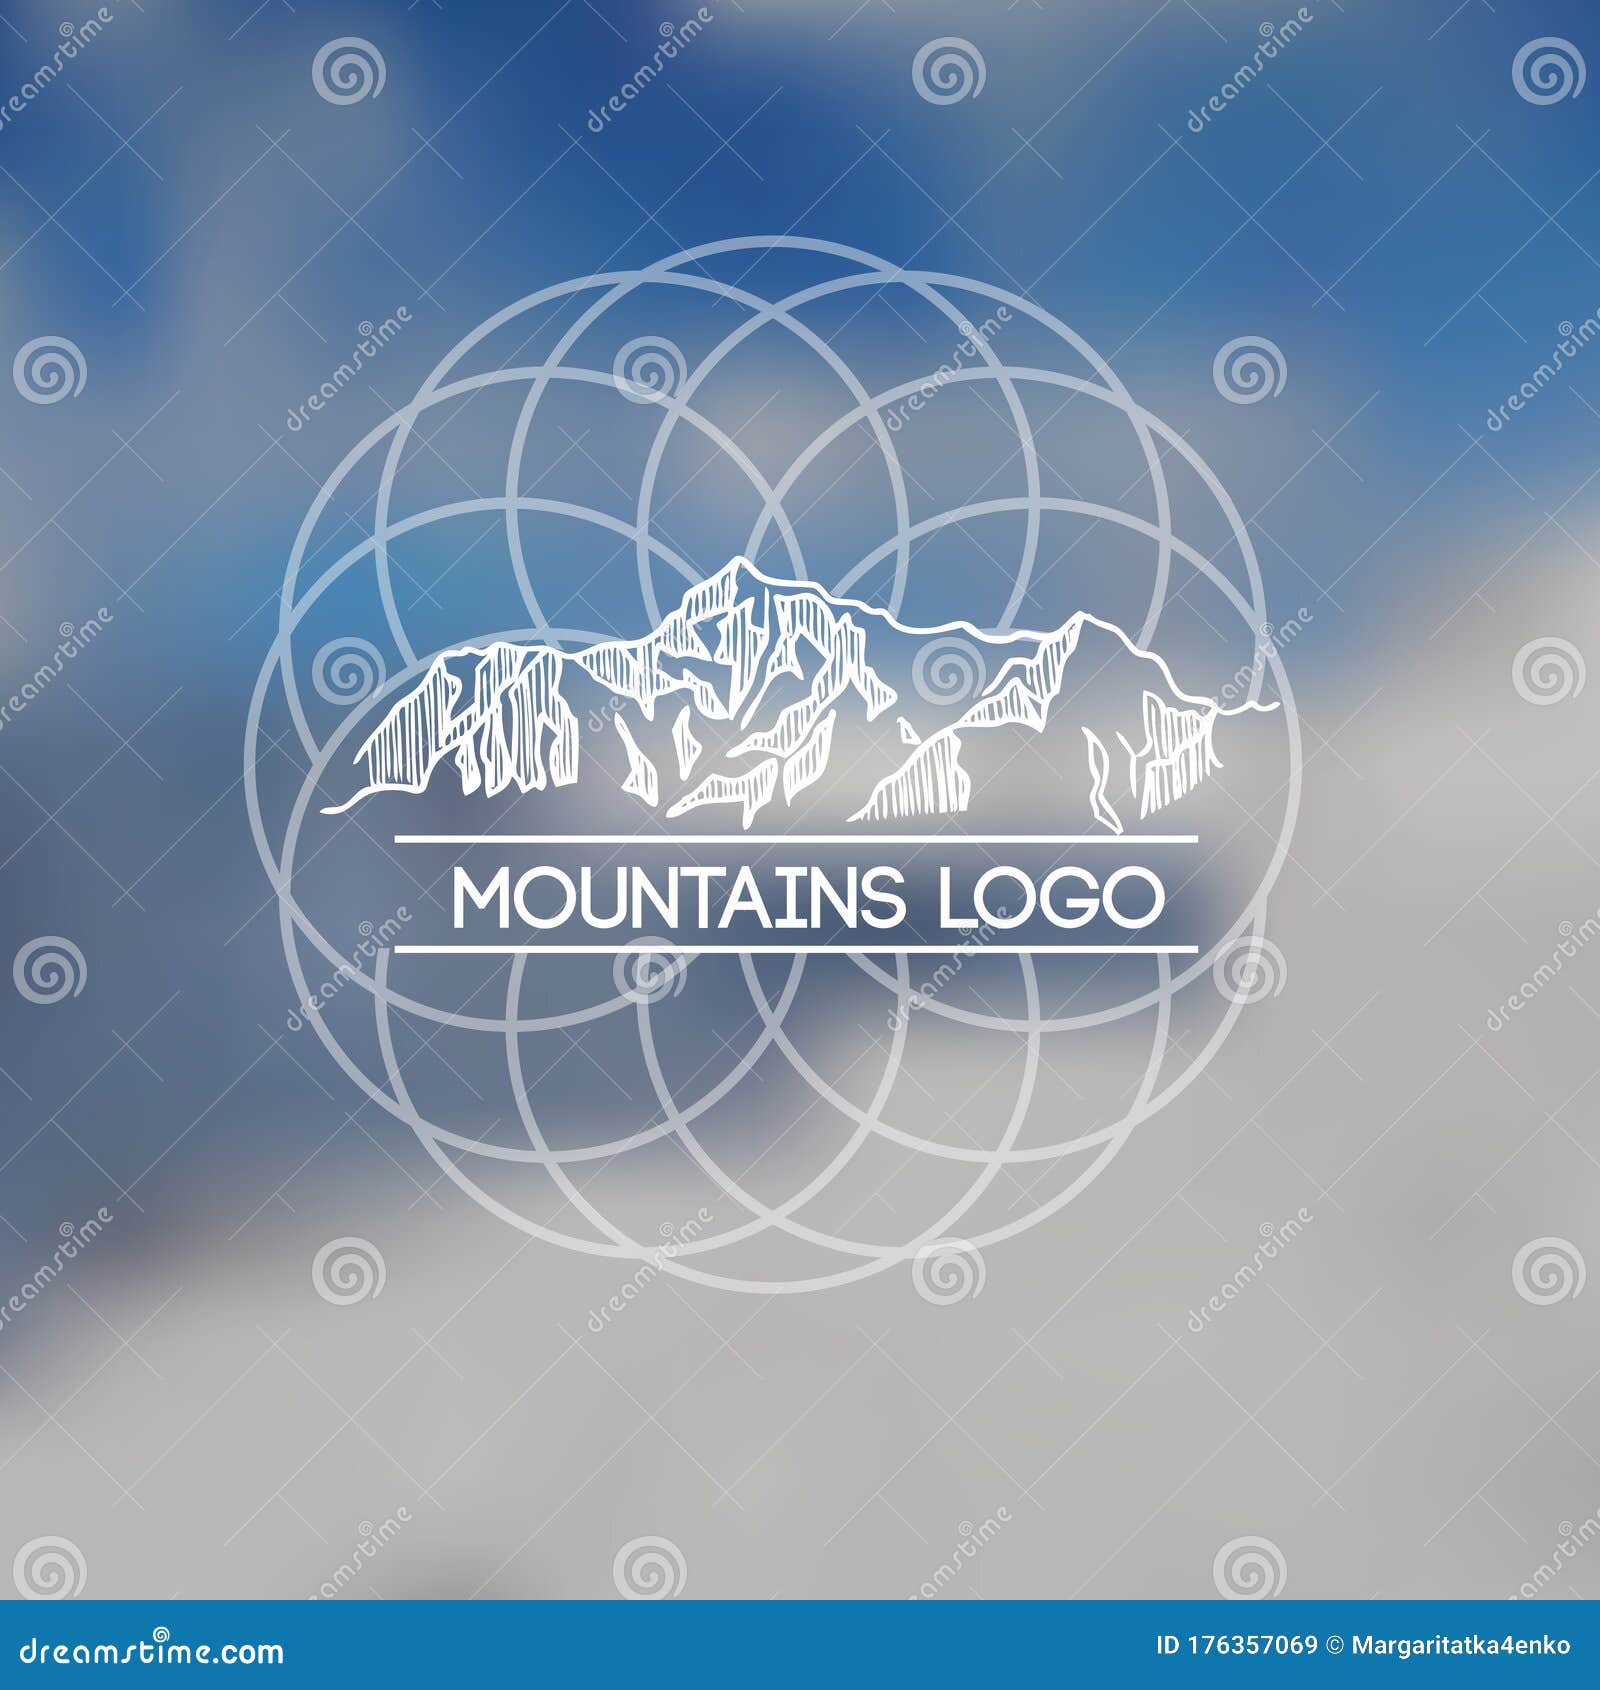 mountains lodo. emblem with stylized mountain landscape for .